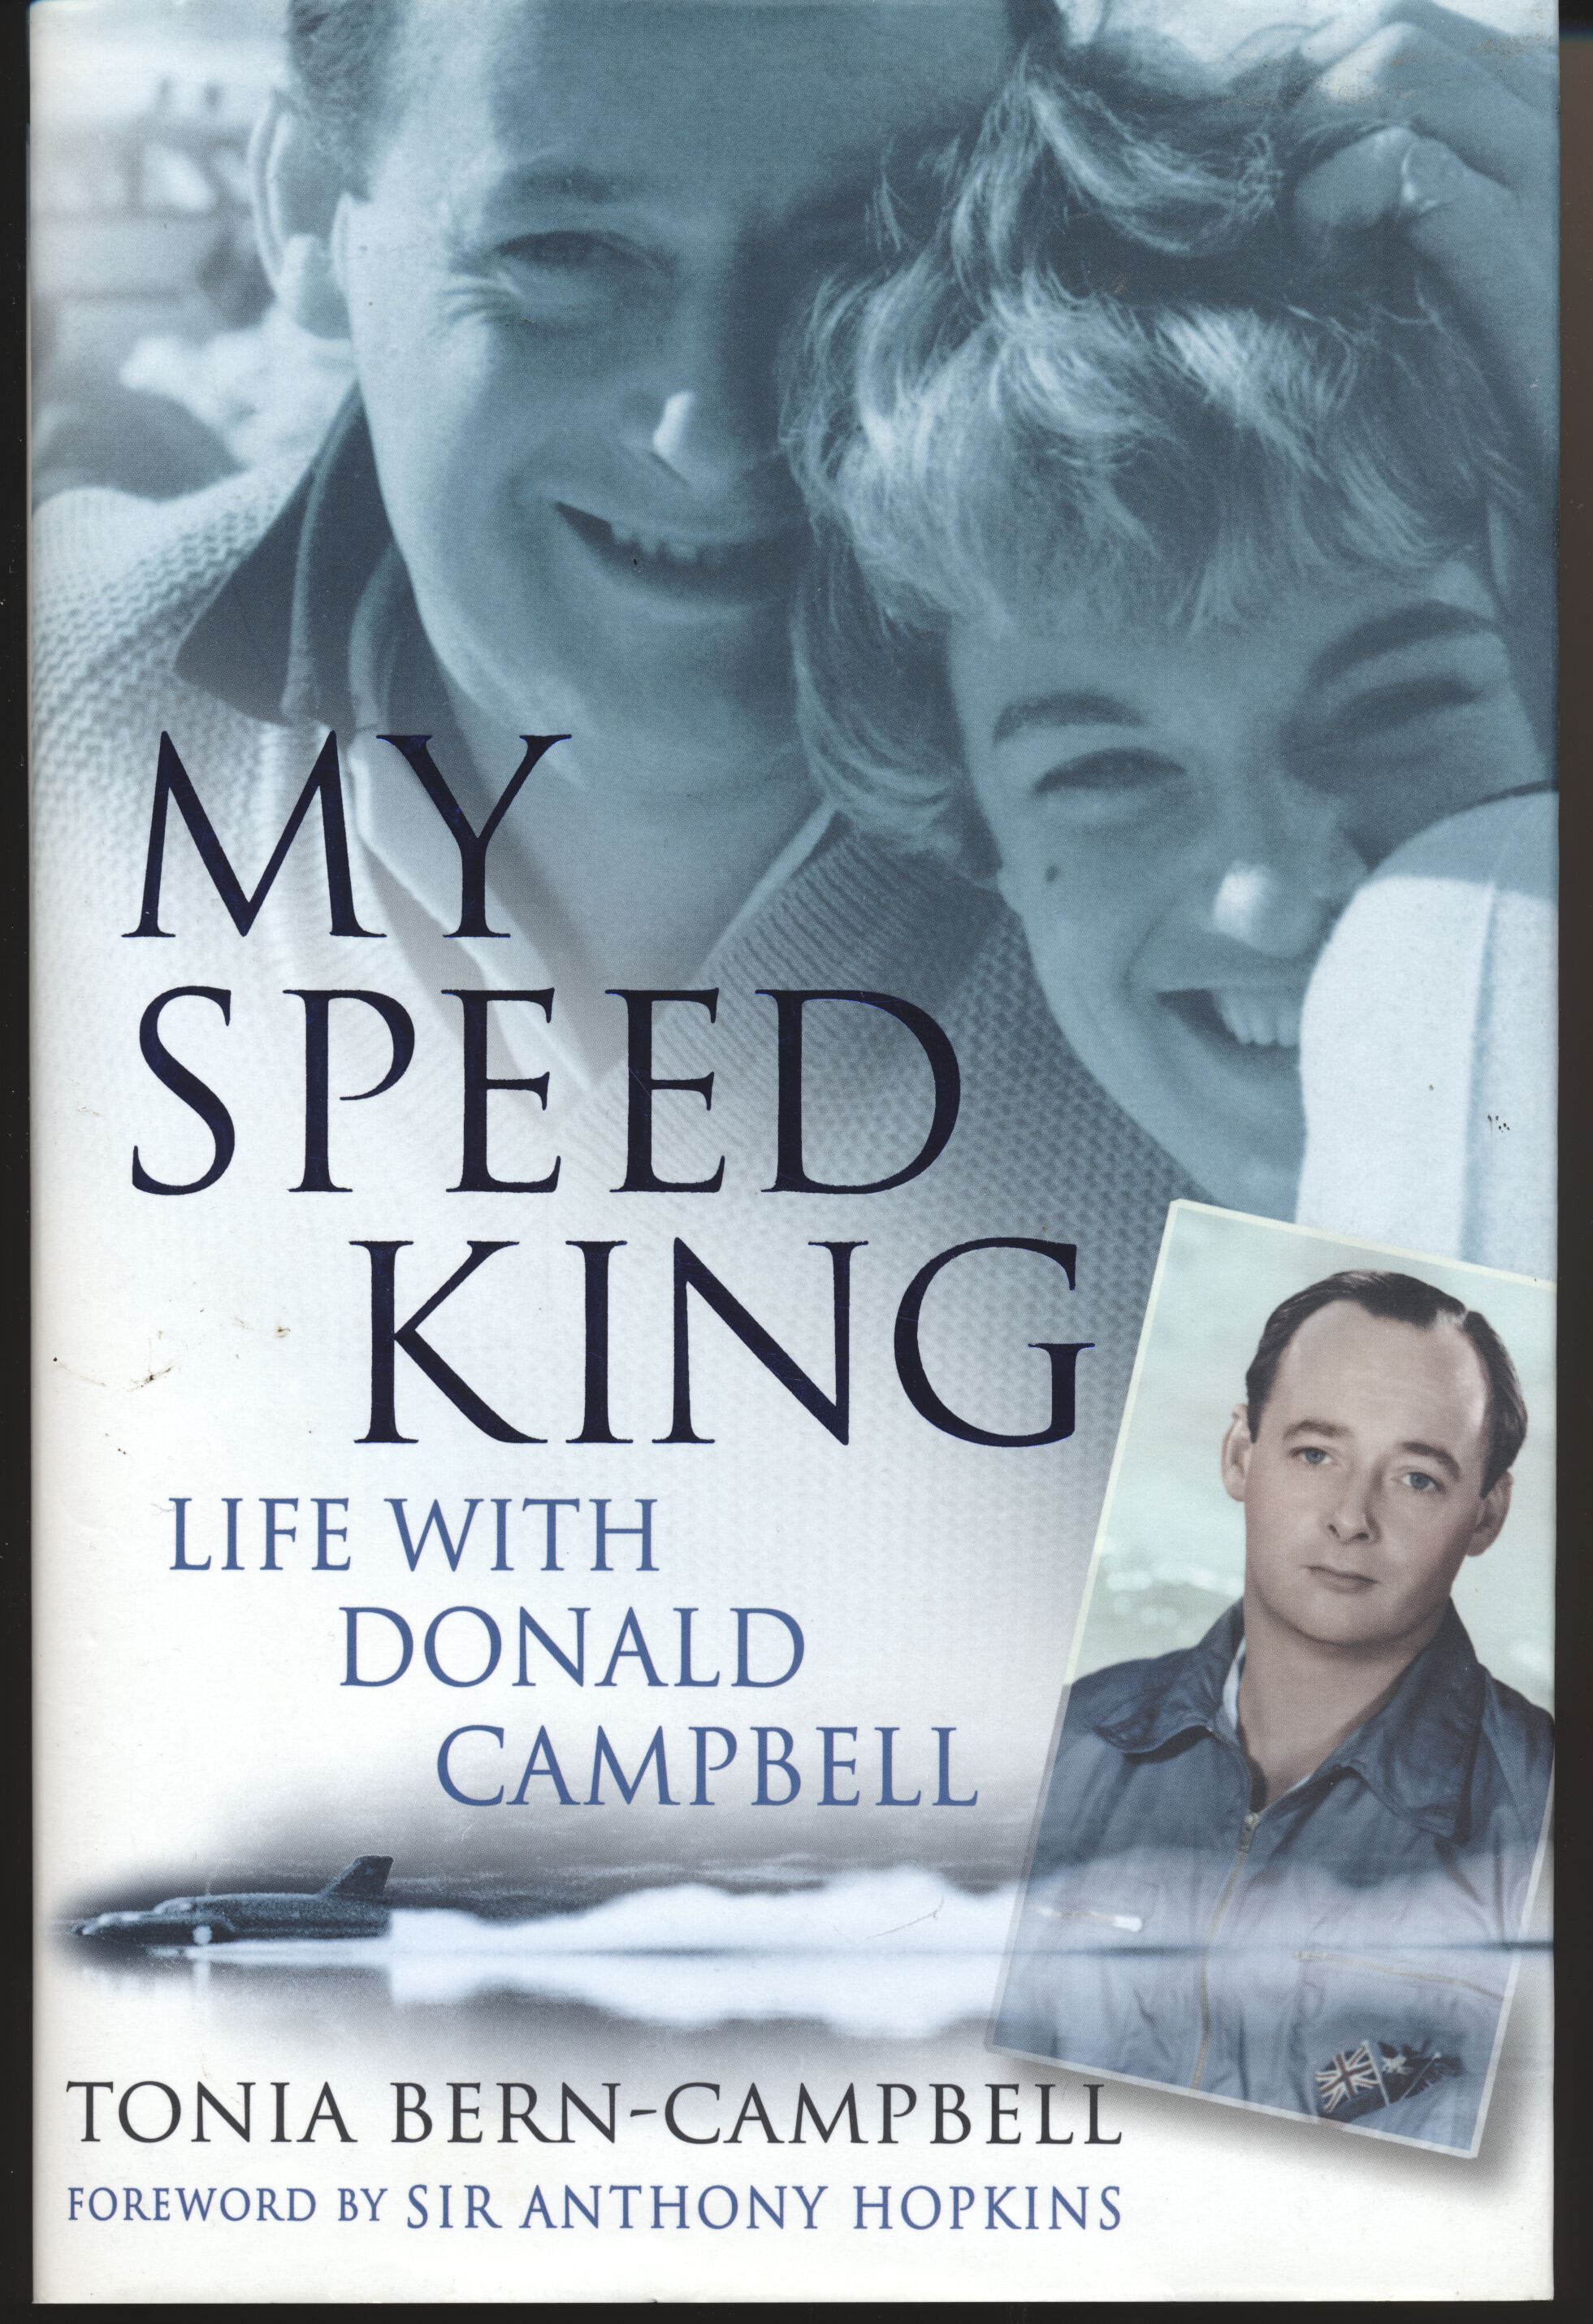 My Speed King - Life with Donald Campbell -Tonia Bern-Campbell